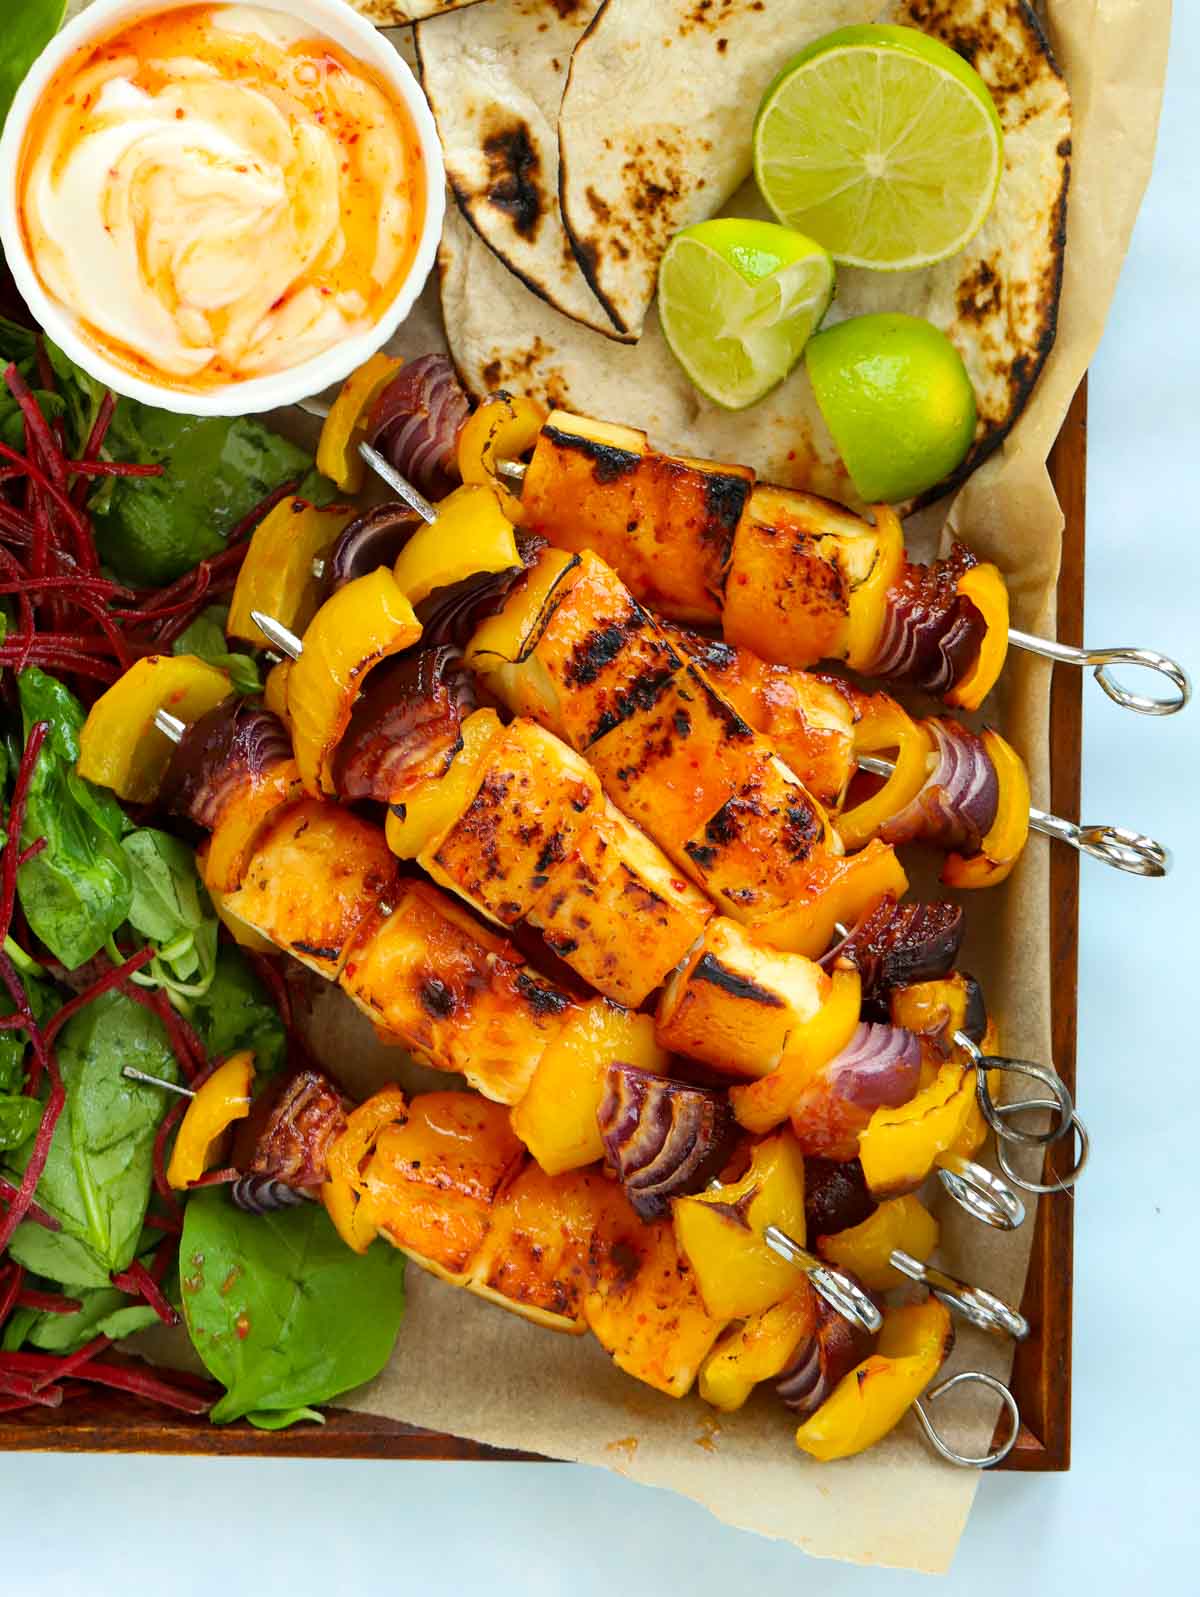 Perfect for the grill or BBQ, this sticky halloumi kebab is delicious and simple